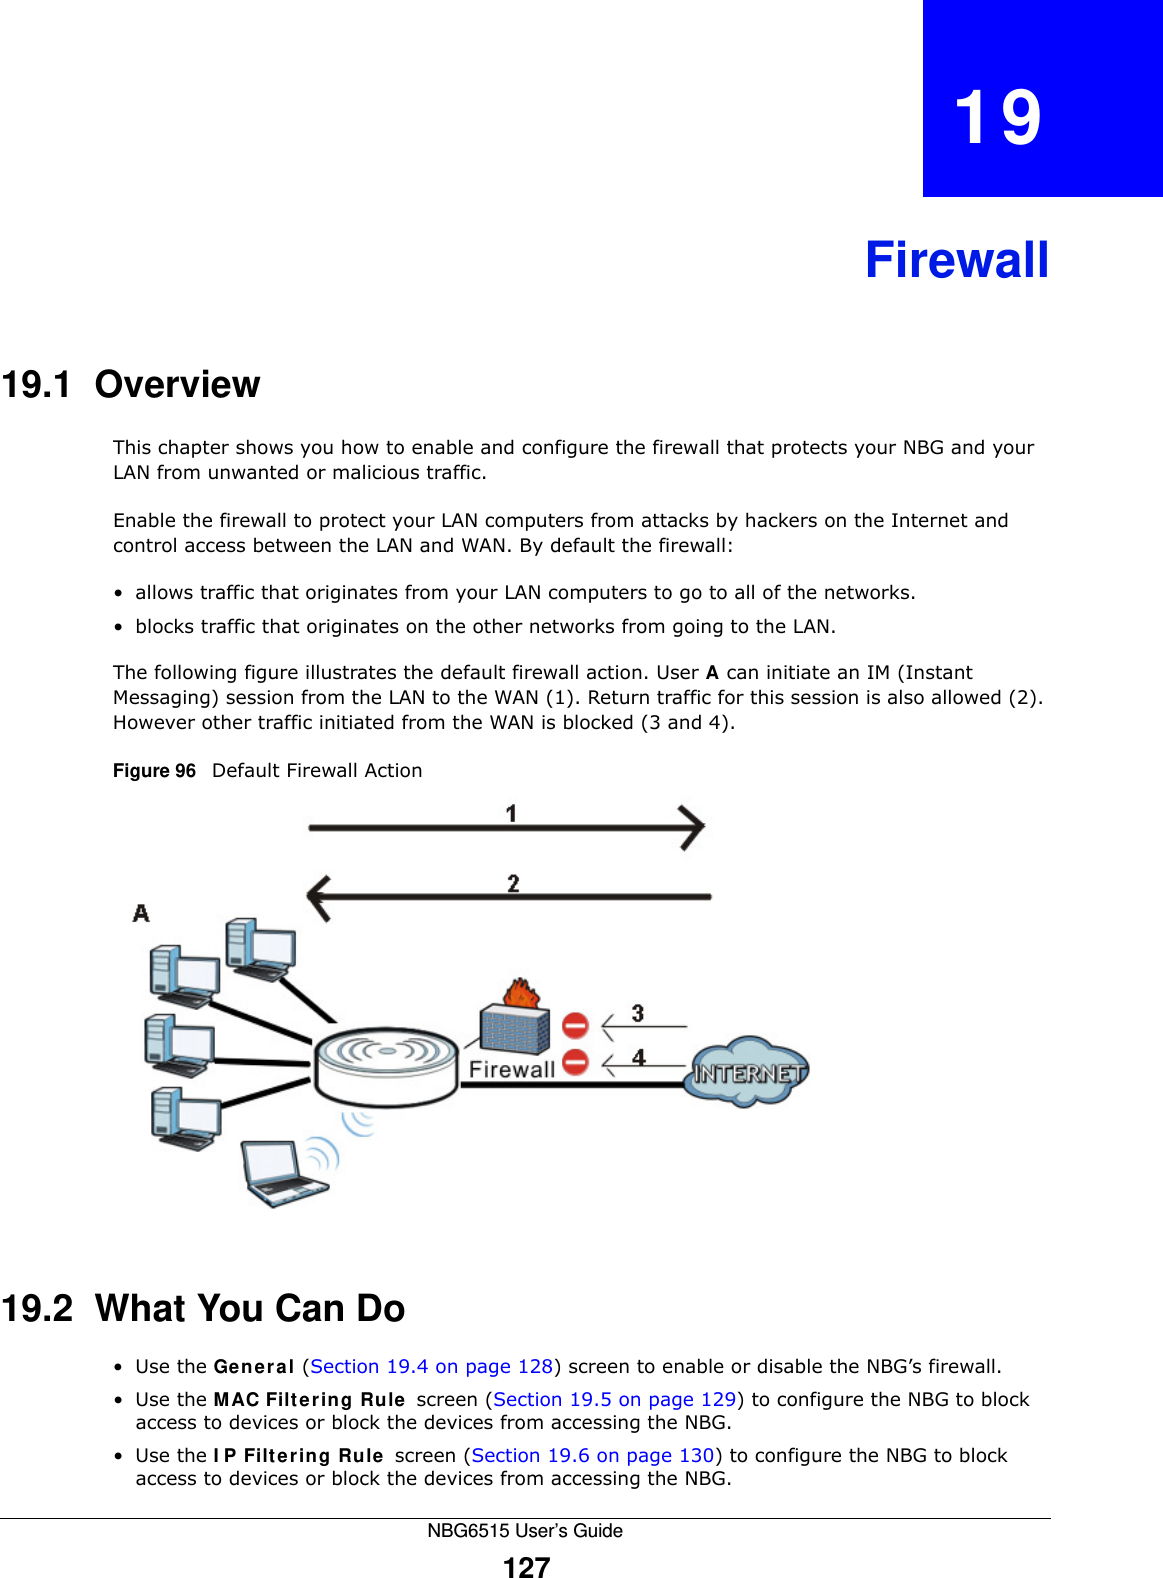 NBG6515 User’s Guide127CHAPTER   19Firewall19.1  Overview   This chapter shows you how to enable and configure the firewall that protects your NBG and your LAN from unwanted or malicious traffic.Enable the firewall to protect your LAN computers from attacks by hackers on the Internet and control access between the LAN and WAN. By default the firewall:• allows traffic that originates from your LAN computers to go to all of the networks. • blocks traffic that originates on the other networks from going to the LAN. The following figure illustrates the default firewall action. User A can initiate an IM (Instant Messaging) session from the LAN to the WAN (1). Return traffic for this session is also allowed (2). However other traffic initiated from the WAN is blocked (3 and 4).Figure 96   Default Firewall Action19.2  What You Can Do•Use the General (Section 19.4 on page 128) screen to enable or disable the NBG’s firewall.•Use the MAC Filtering Rule screen (Section 19.5 on page 129) to configure the NBG to block access to devices or block the devices from accessing the NBG.•Use the IP Filtering Rule screen (Section 19.6 on page 130) to configure the NBG to block access to devices or block the devices from accessing the NBG.